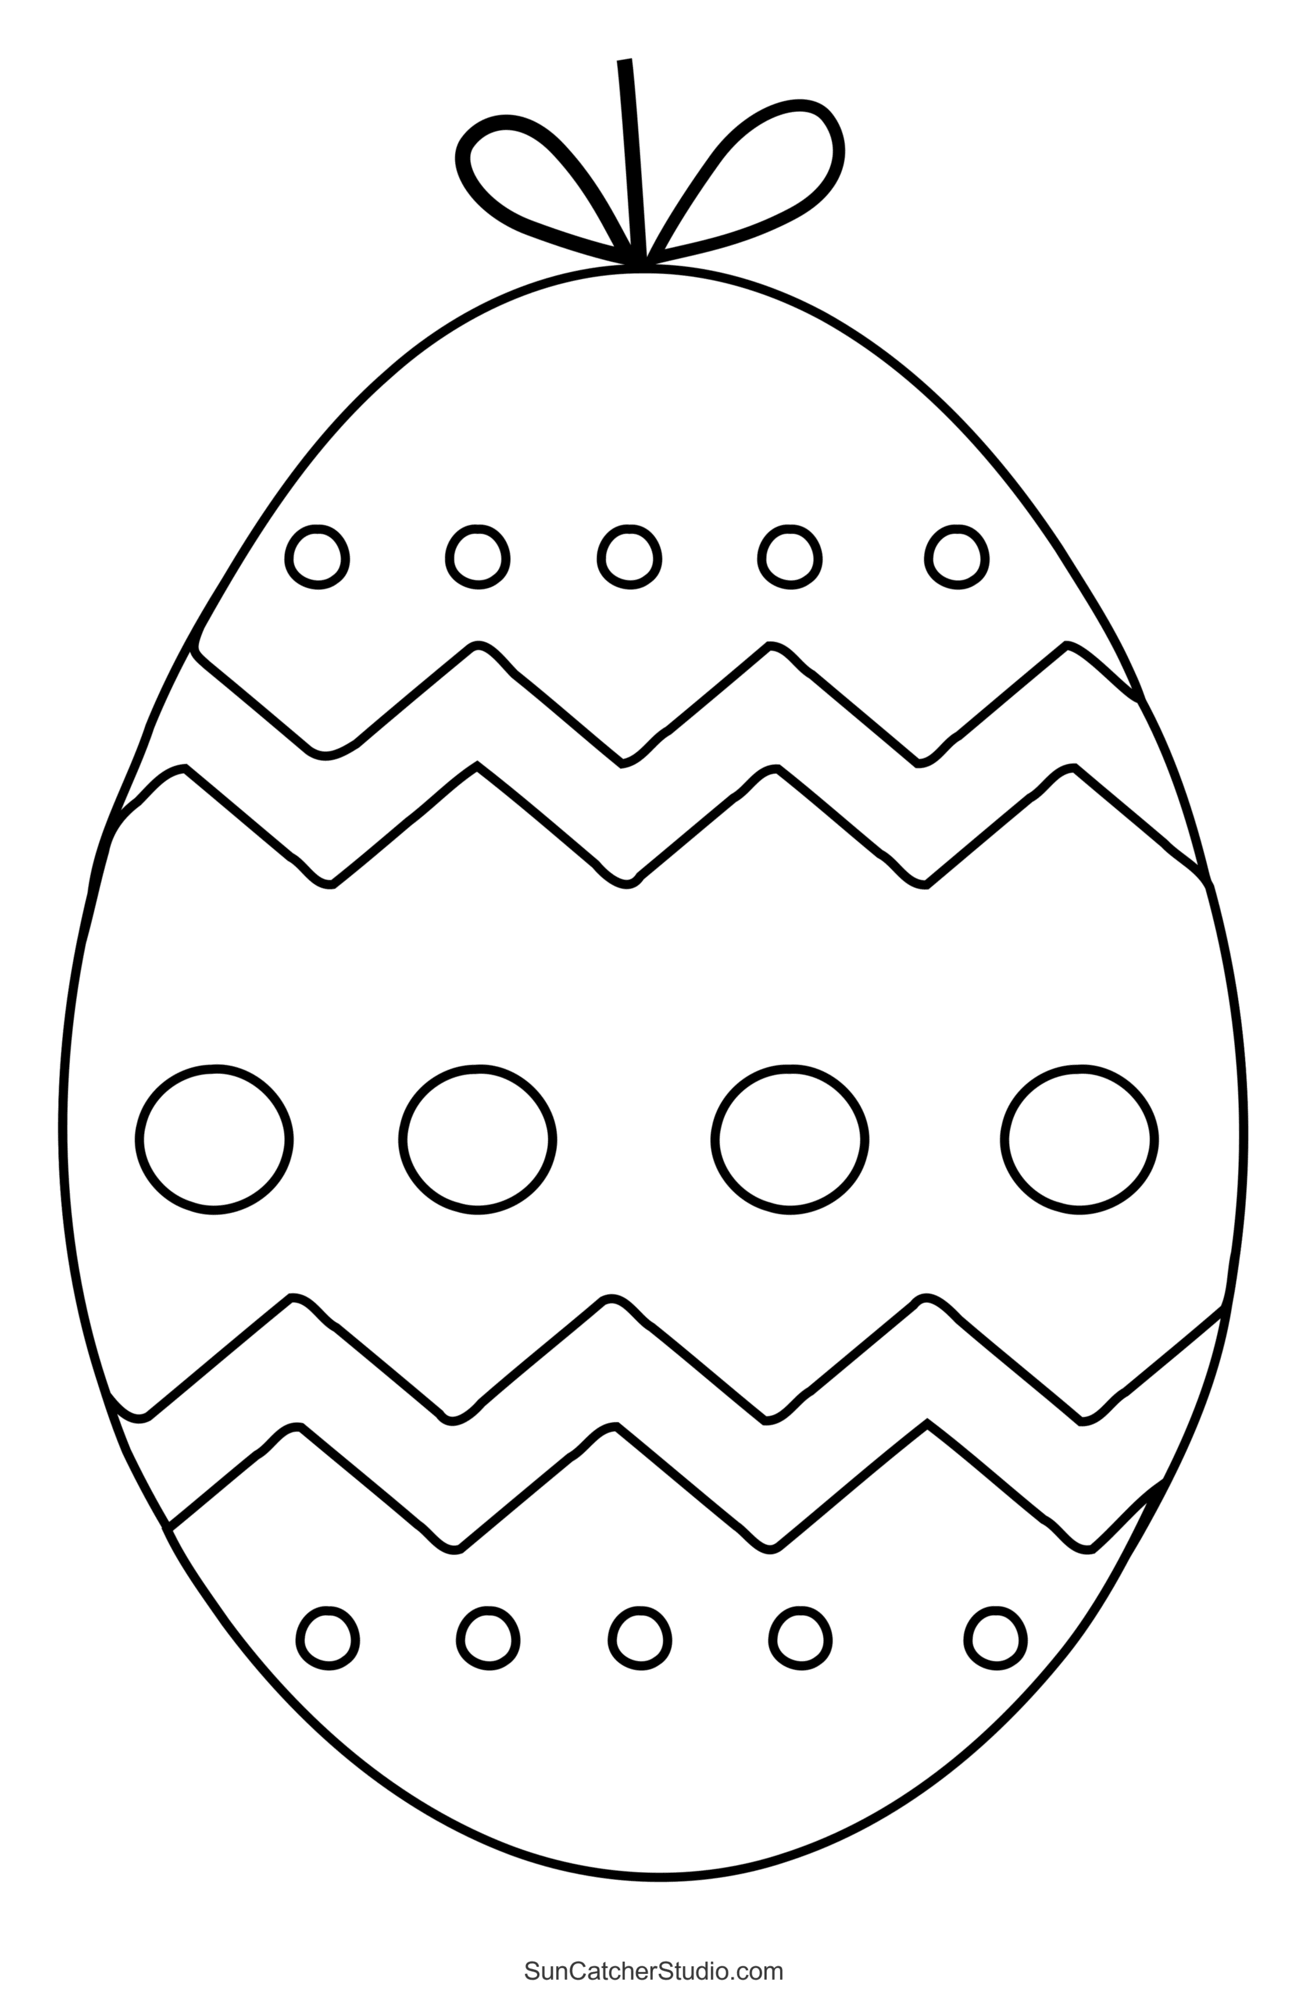 Easter Clip Art Patterns (Egg and Bunny Stencils) – DIY Projects ...